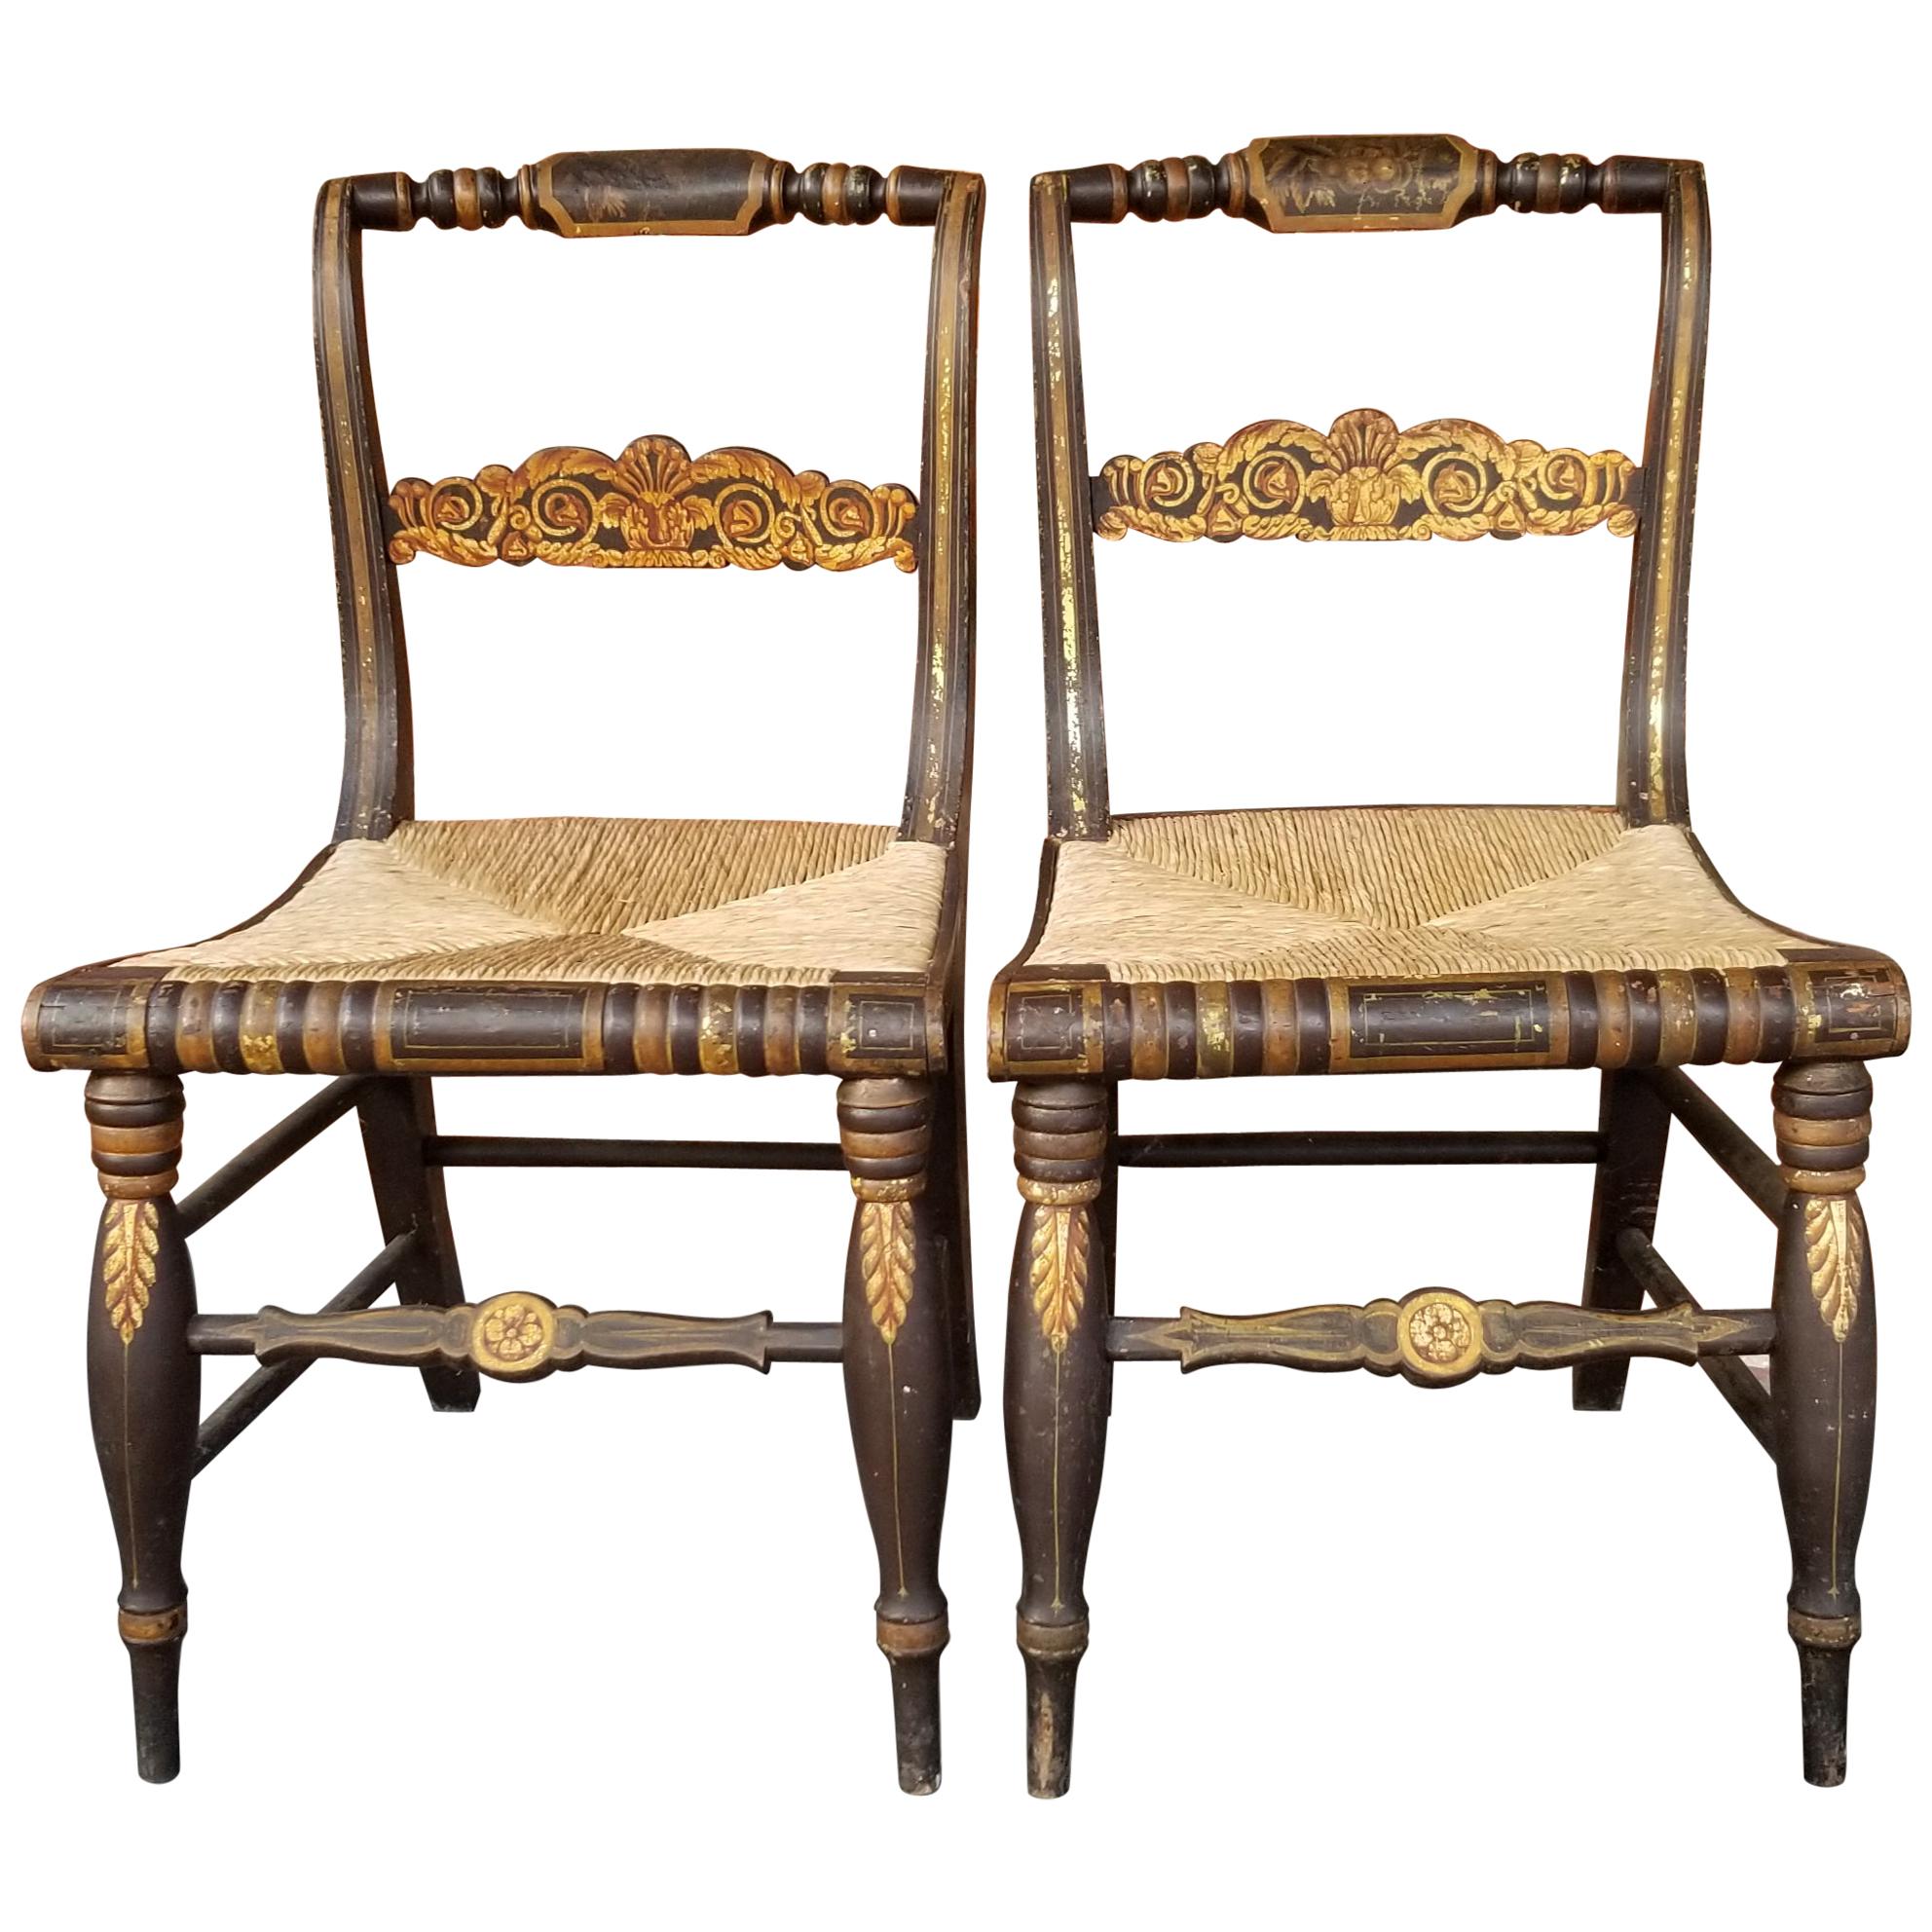 Pair of 19th Century American Gilt Stenciled Side Chairs